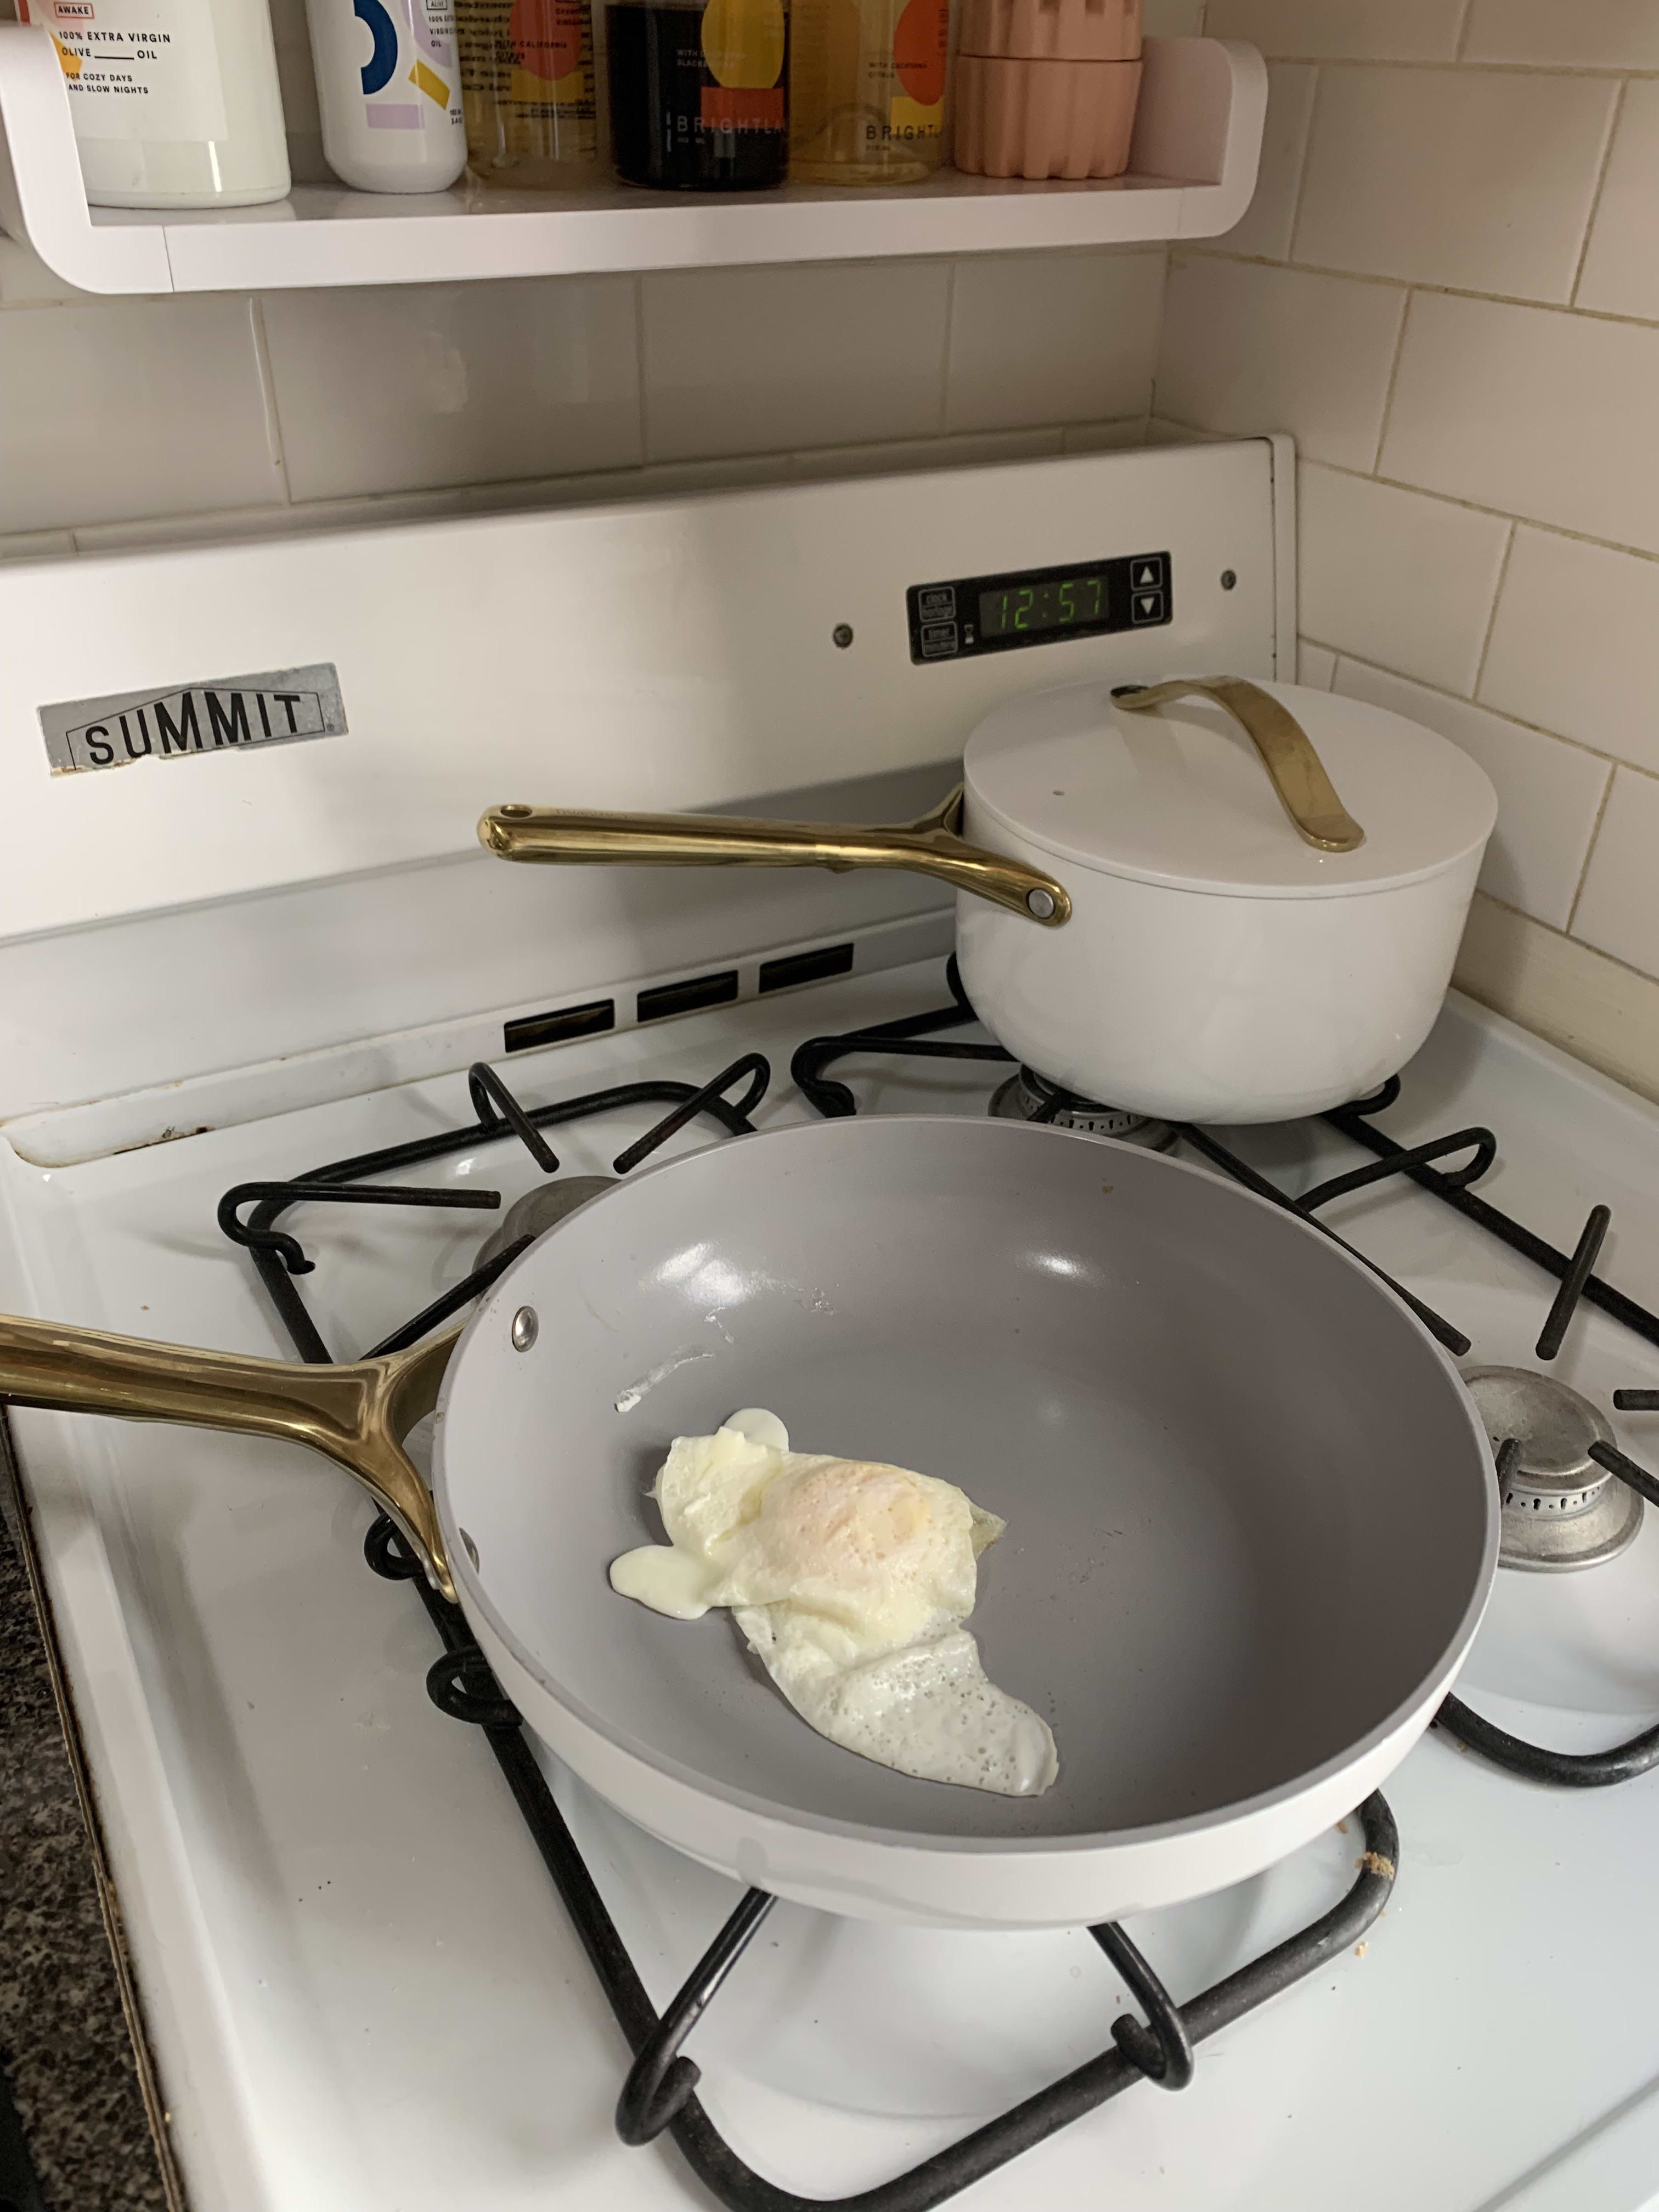 Caraway Iconics Nonstick Pan Review: The Only Pan I'll Ever Use